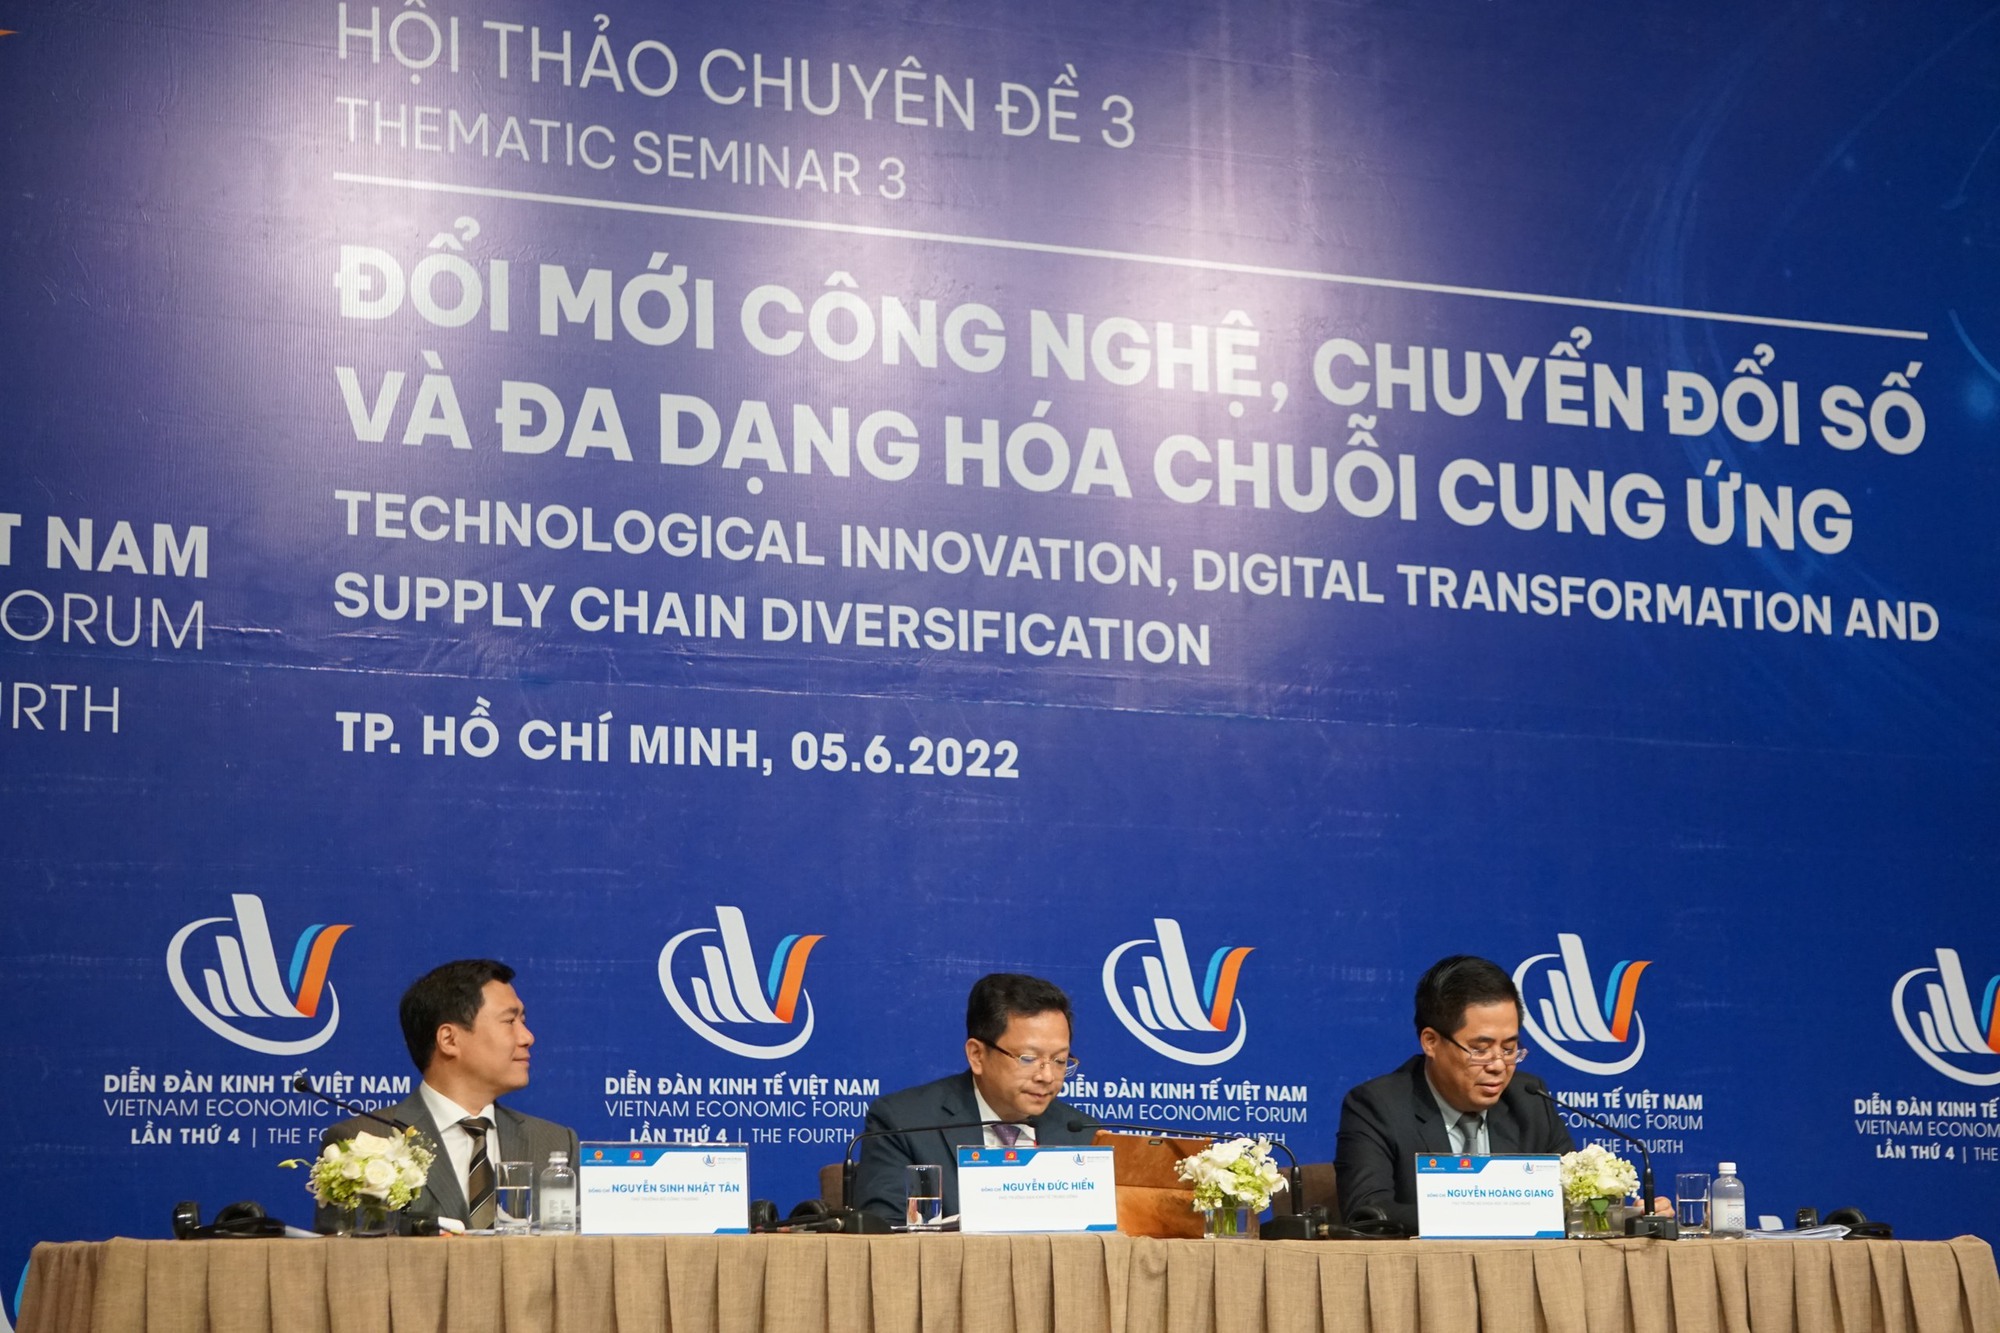 Vietnam is not necessarily behind in technological innovation and digital transformation - Photo 4.